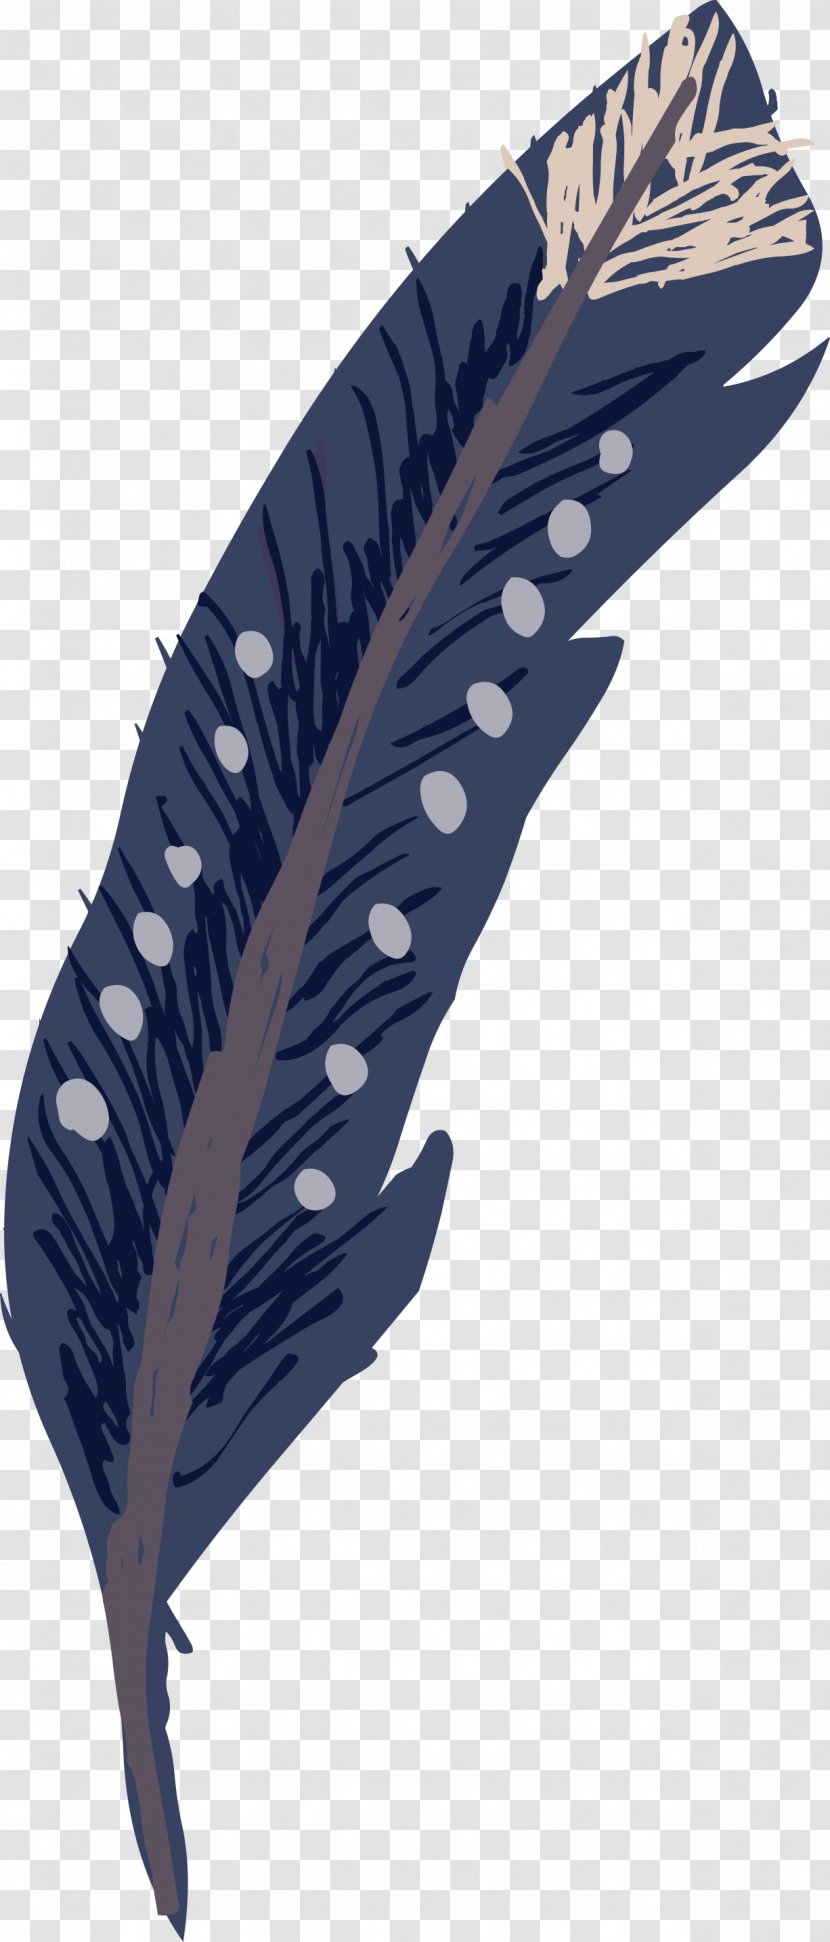 Feather Clip Art - Pixel - Hand-painted Feathers Transparent PNG